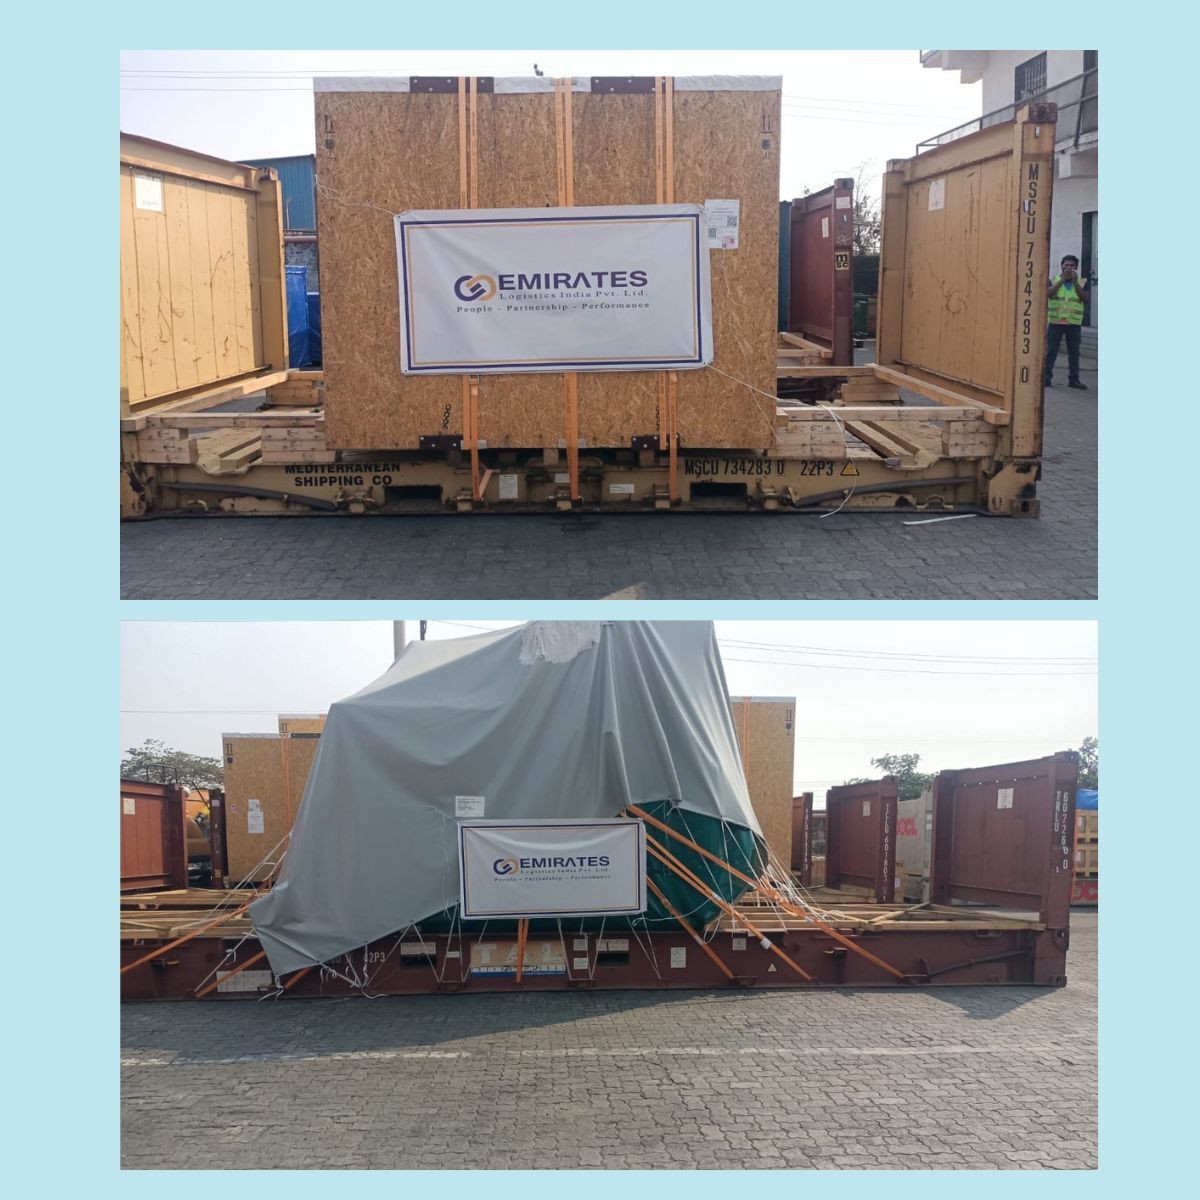 Successful shipment of a Melting Furnace for one of India's biggest Vehicle/Automobile Manufacturers! 🏭 
From Hamburg 🇩🇪 to Nhava Sheva 🇮🇳

Cargo comprising 4x40FR, 2x20FR, 2x40HQ, and 2x20GP containers. 

#FreightForwarding #Logistics #SuccessStory  🚚��